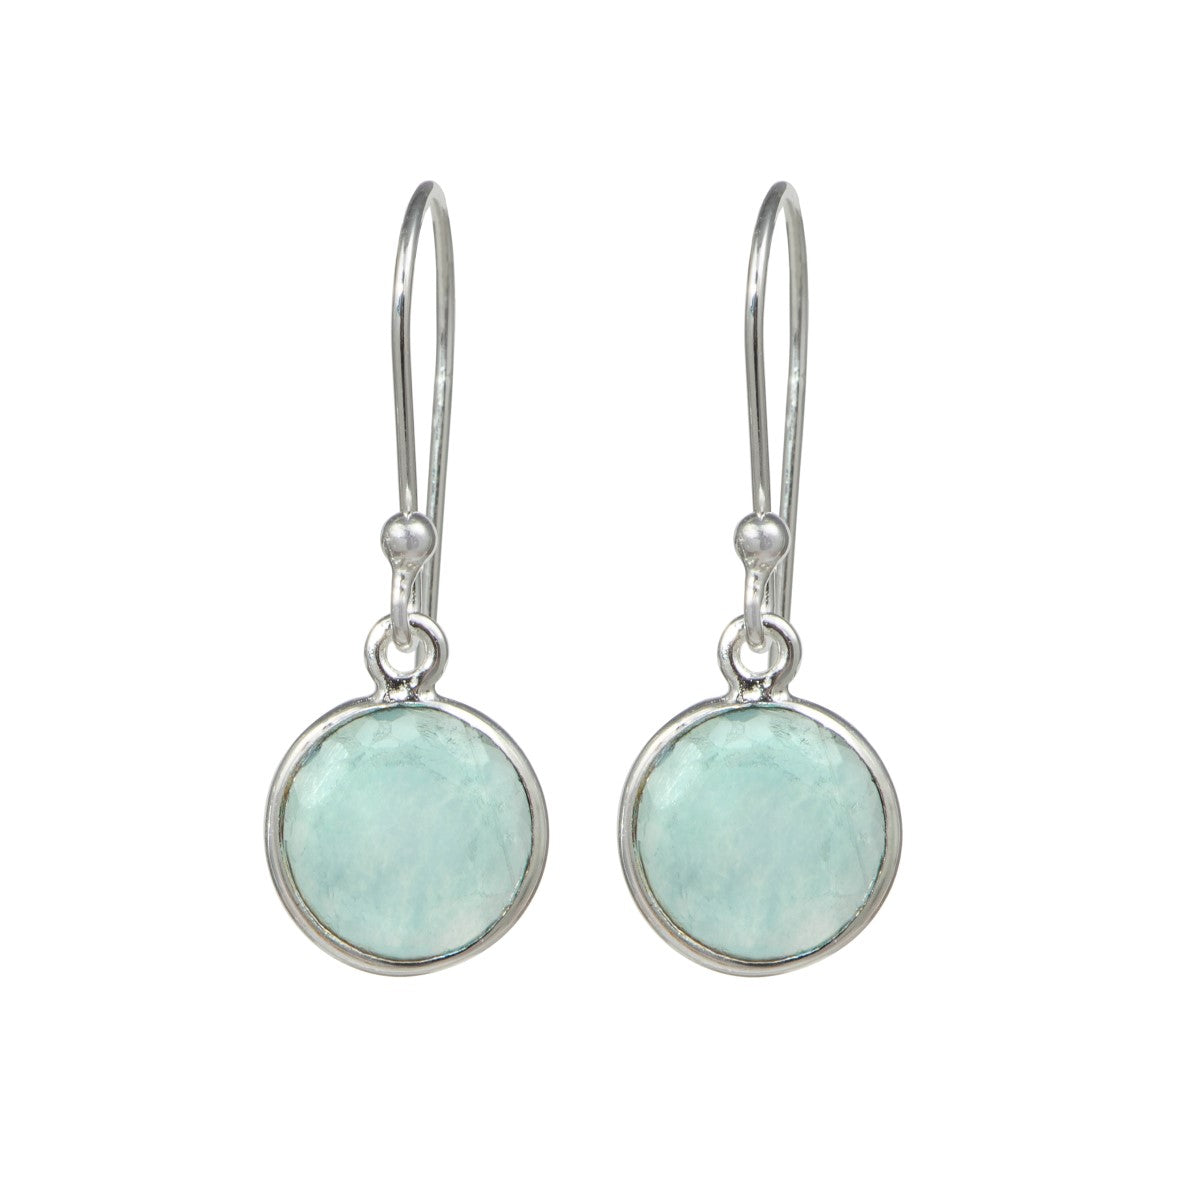 Apatite Sterling Silver Earrings with a Round Faceted Gemstone Drop